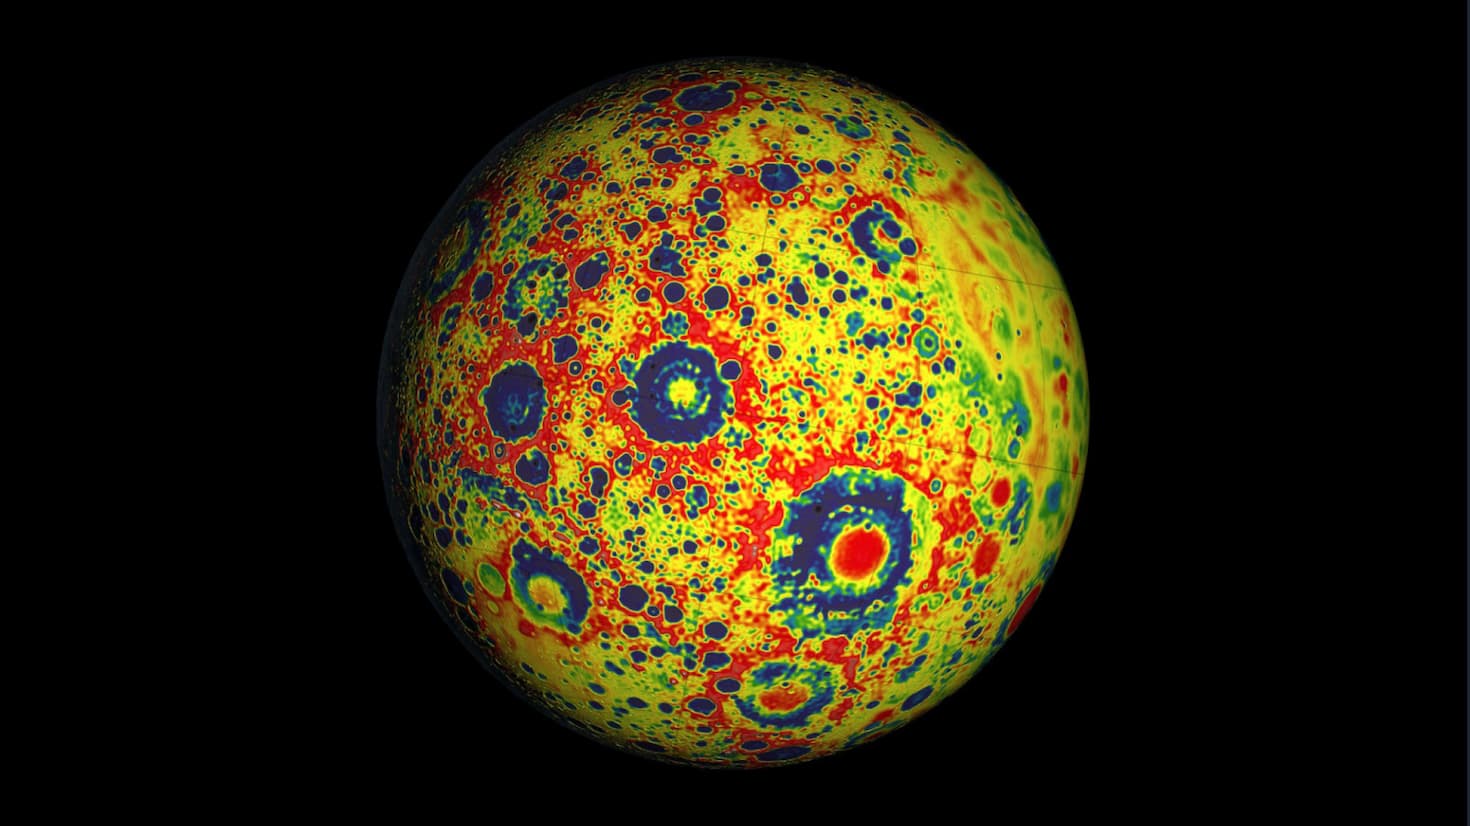 Imaging scan of the surface of the moon